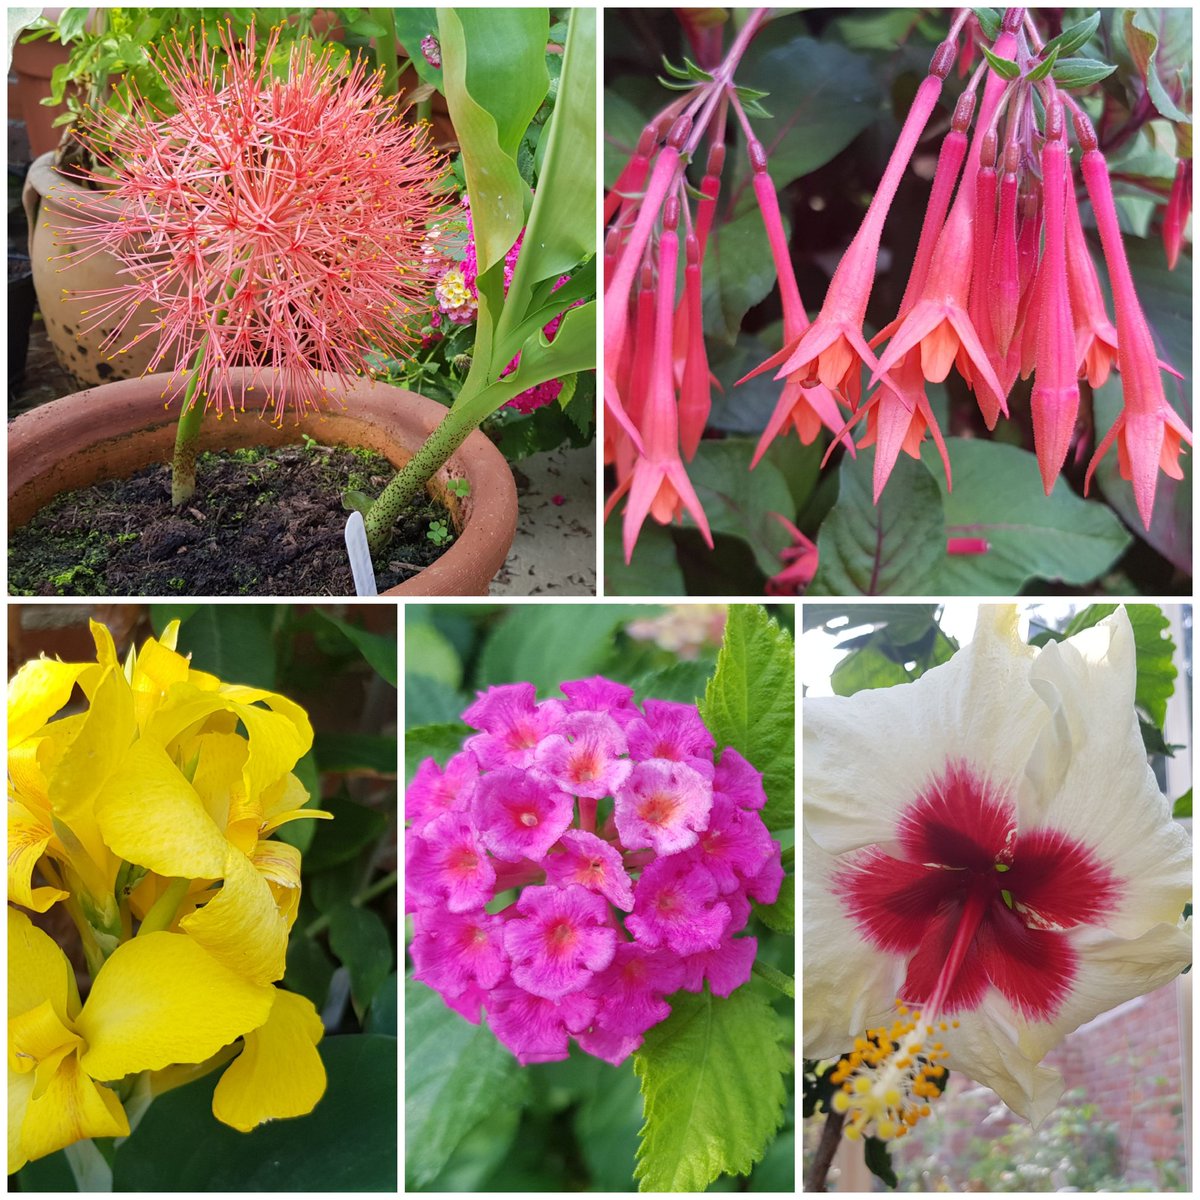 Lovely to come back from holiday to some pretty greenhouse flowers. #greenhouse #hotcolours #garden #gardening